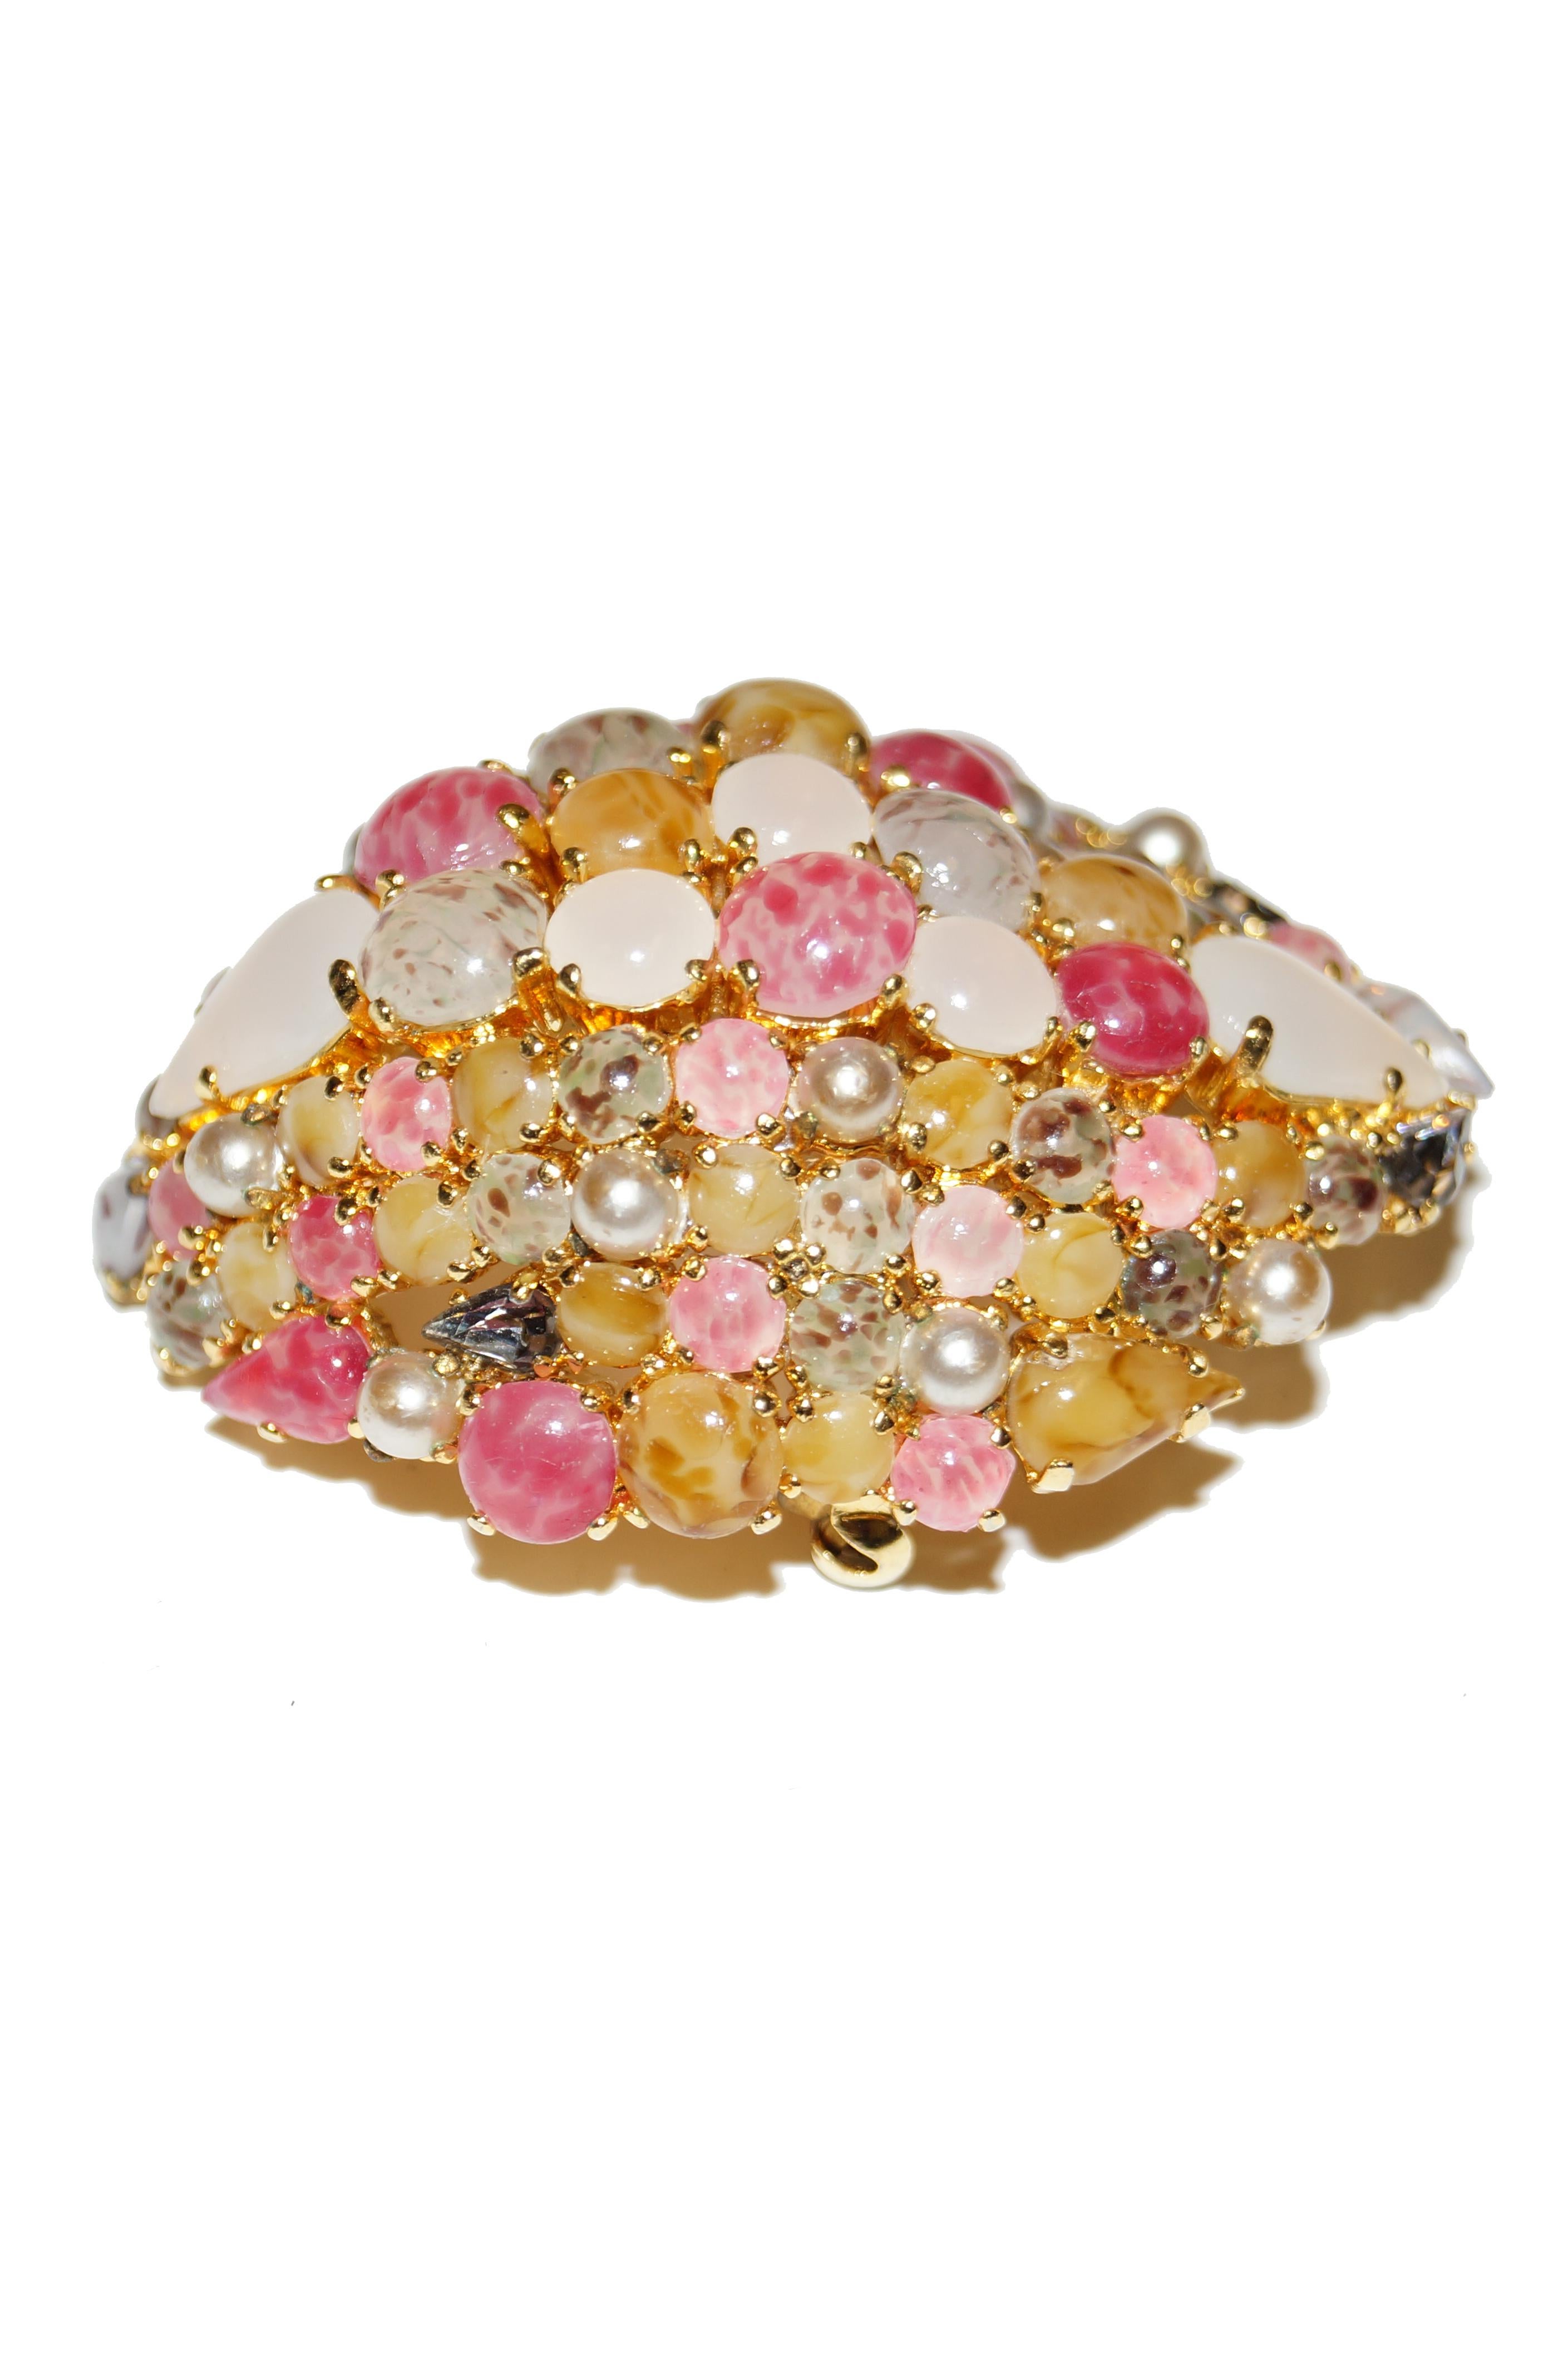 Christian Dior Glass Cabochon Cluster Brooch, 1963  In Excellent Condition For Sale In Houston, TX